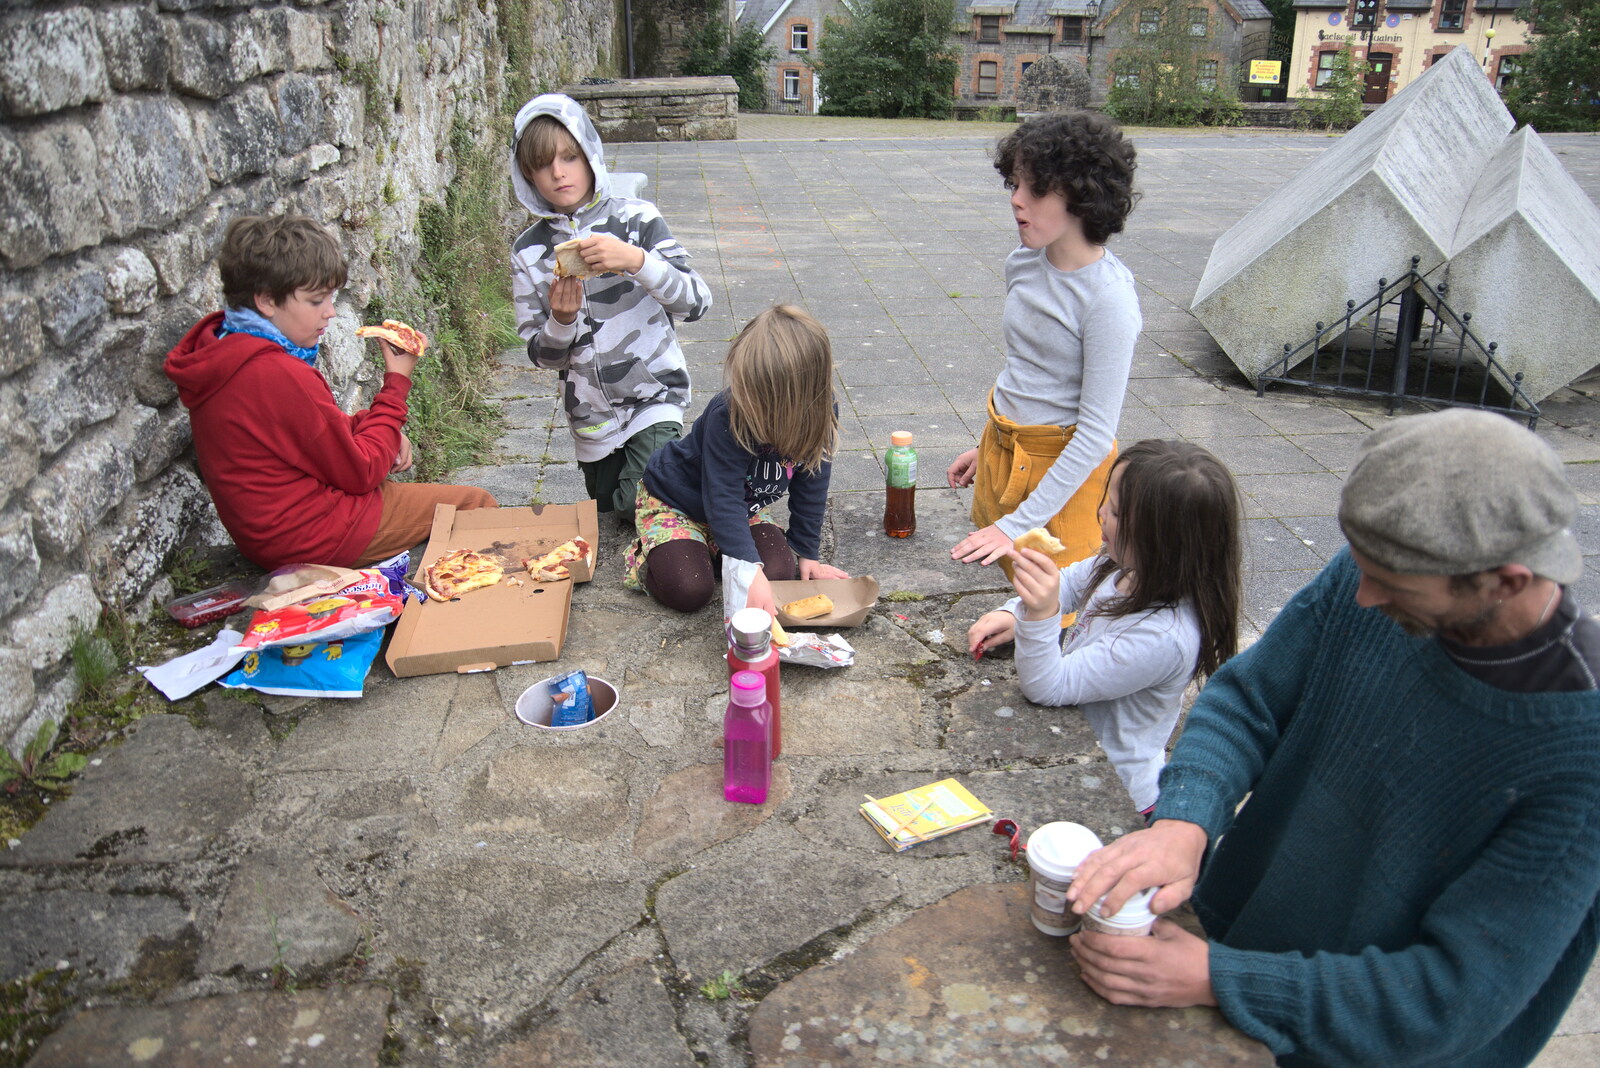 It's a pizza picnic from Manorhamilton and the Street Art of Dún Laoghaire, Ireland - 15th August 2021